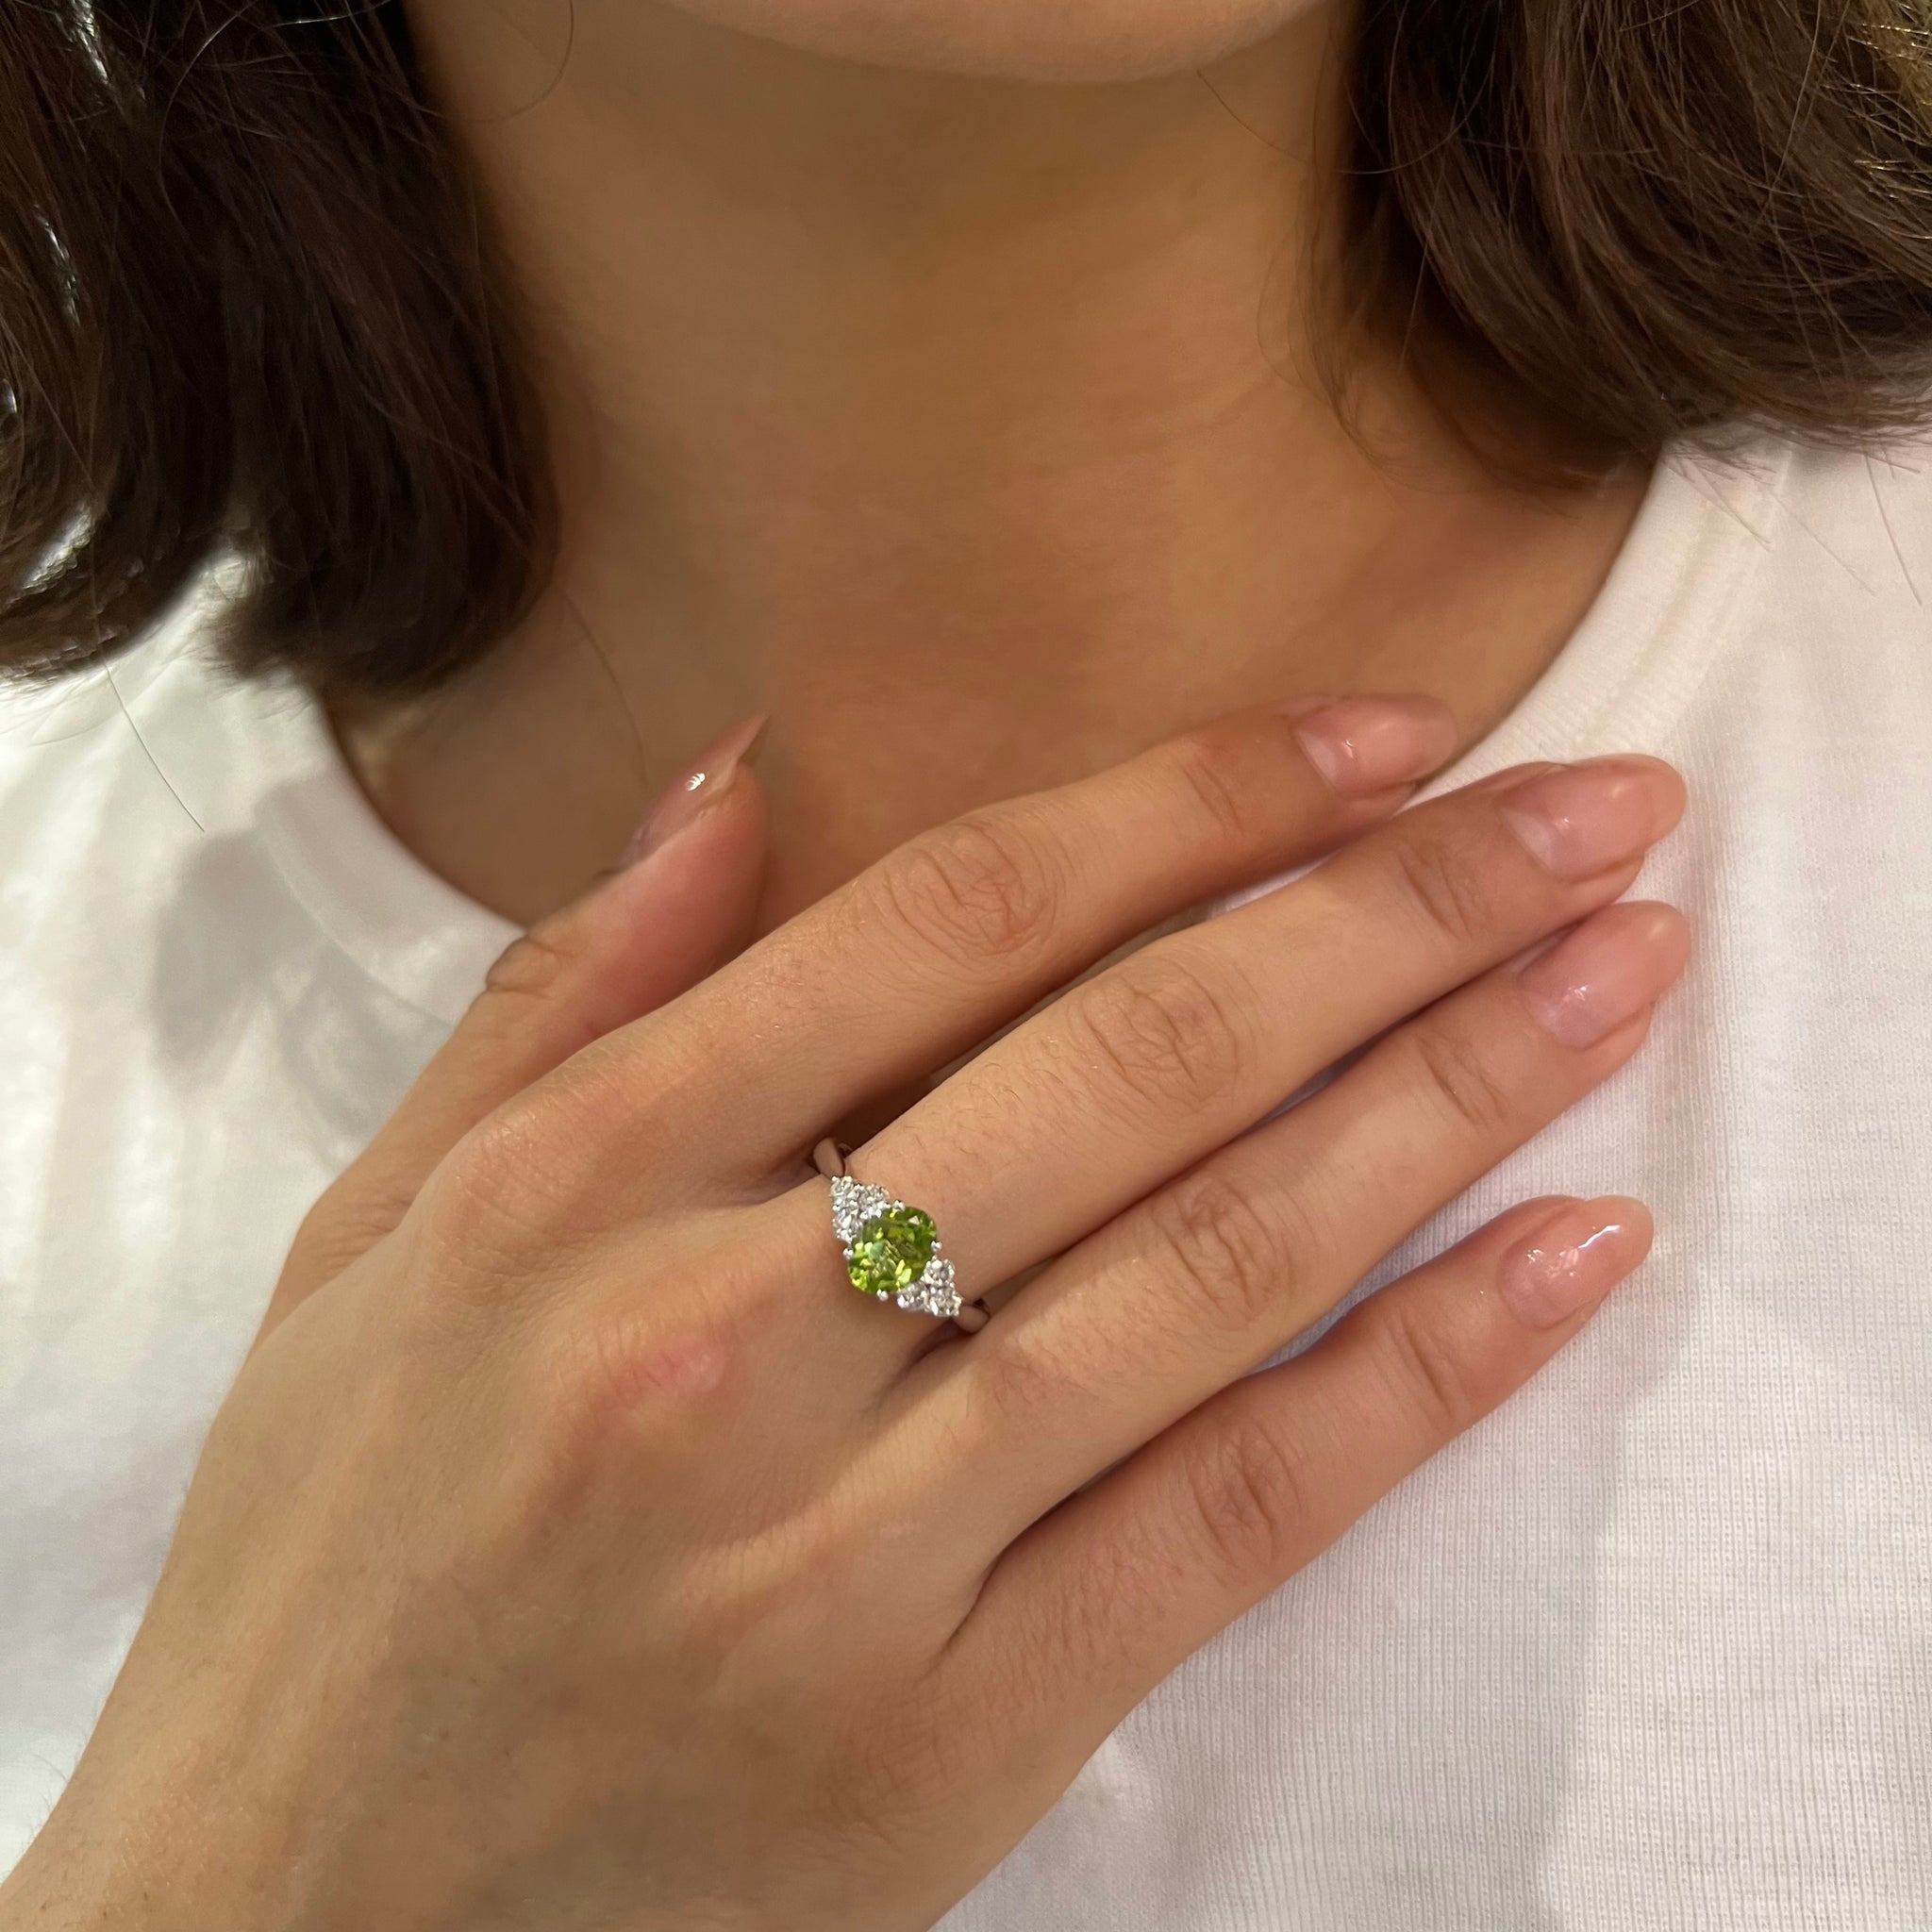 9ct White Gold 0.83ct Oval Peridot and Diamond Cluster Ring